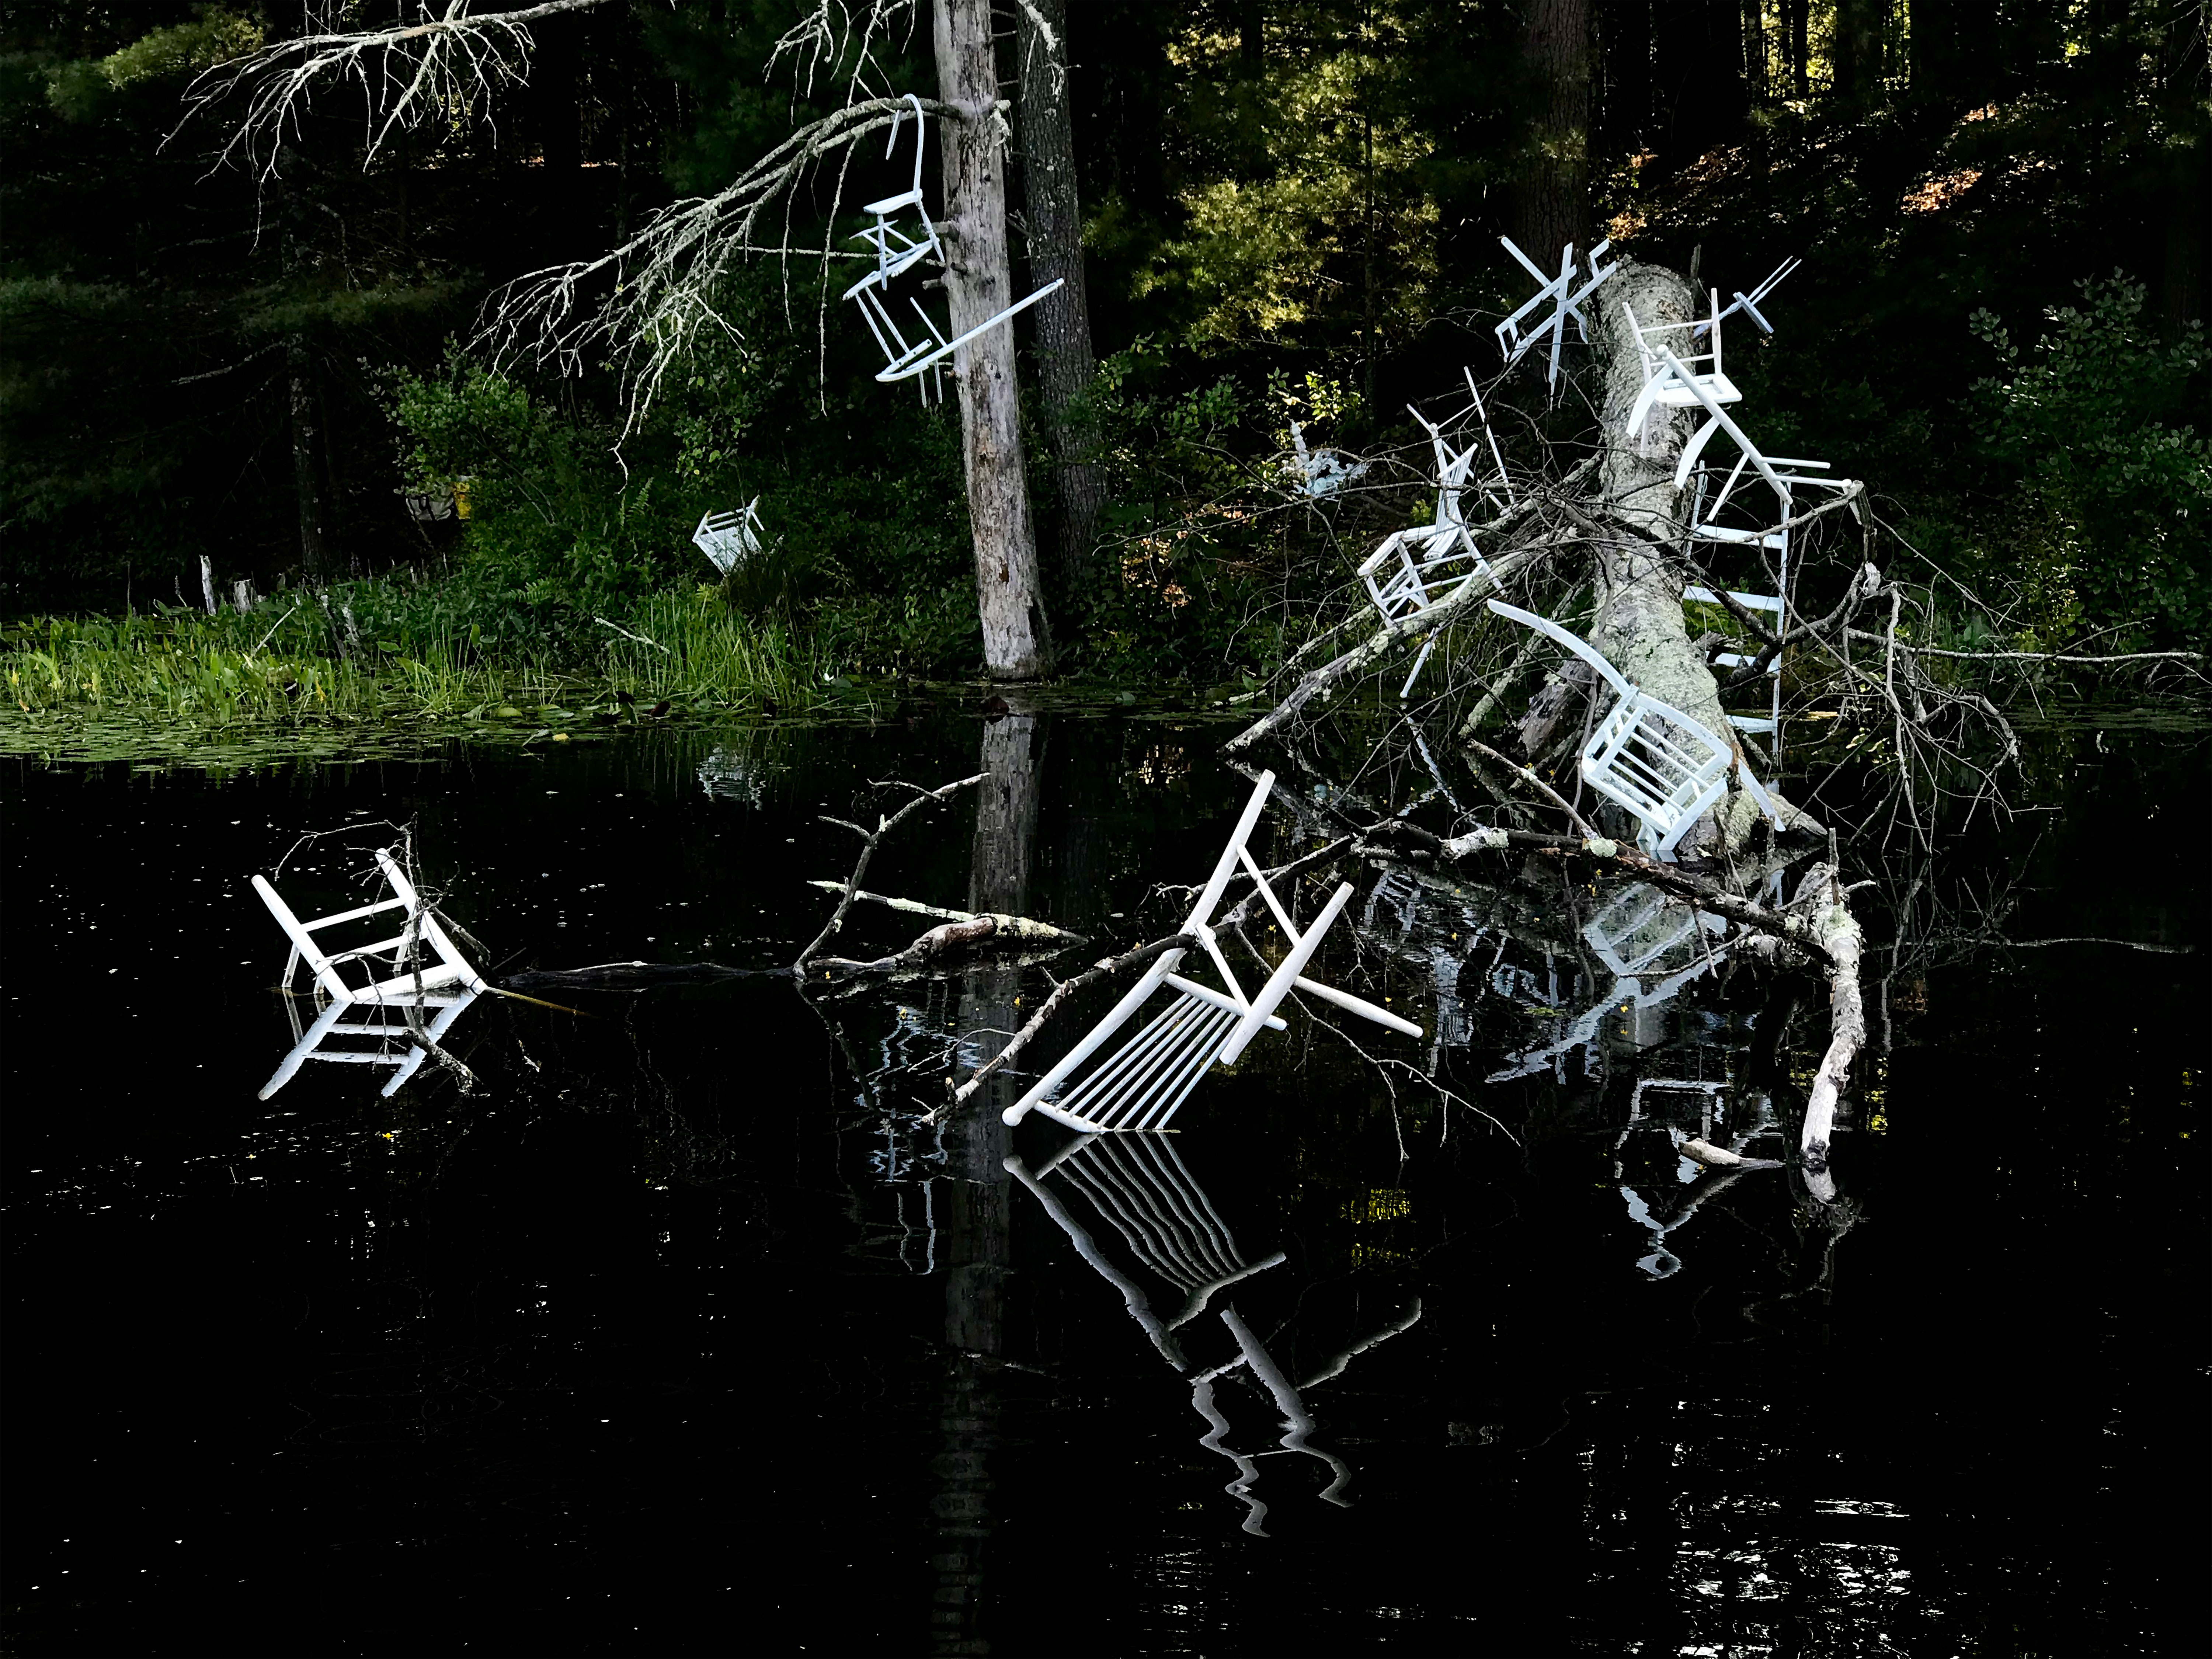 Photograph highlighting a detail of 'Metamorphic Reflections' installation by artist Caroline Coolidge. The fallen tree branch with white-painted wooden objects fills the upper two-thirds of the image, while the lower third shows the dark pond water with shimmering reflections of the wooden objects.